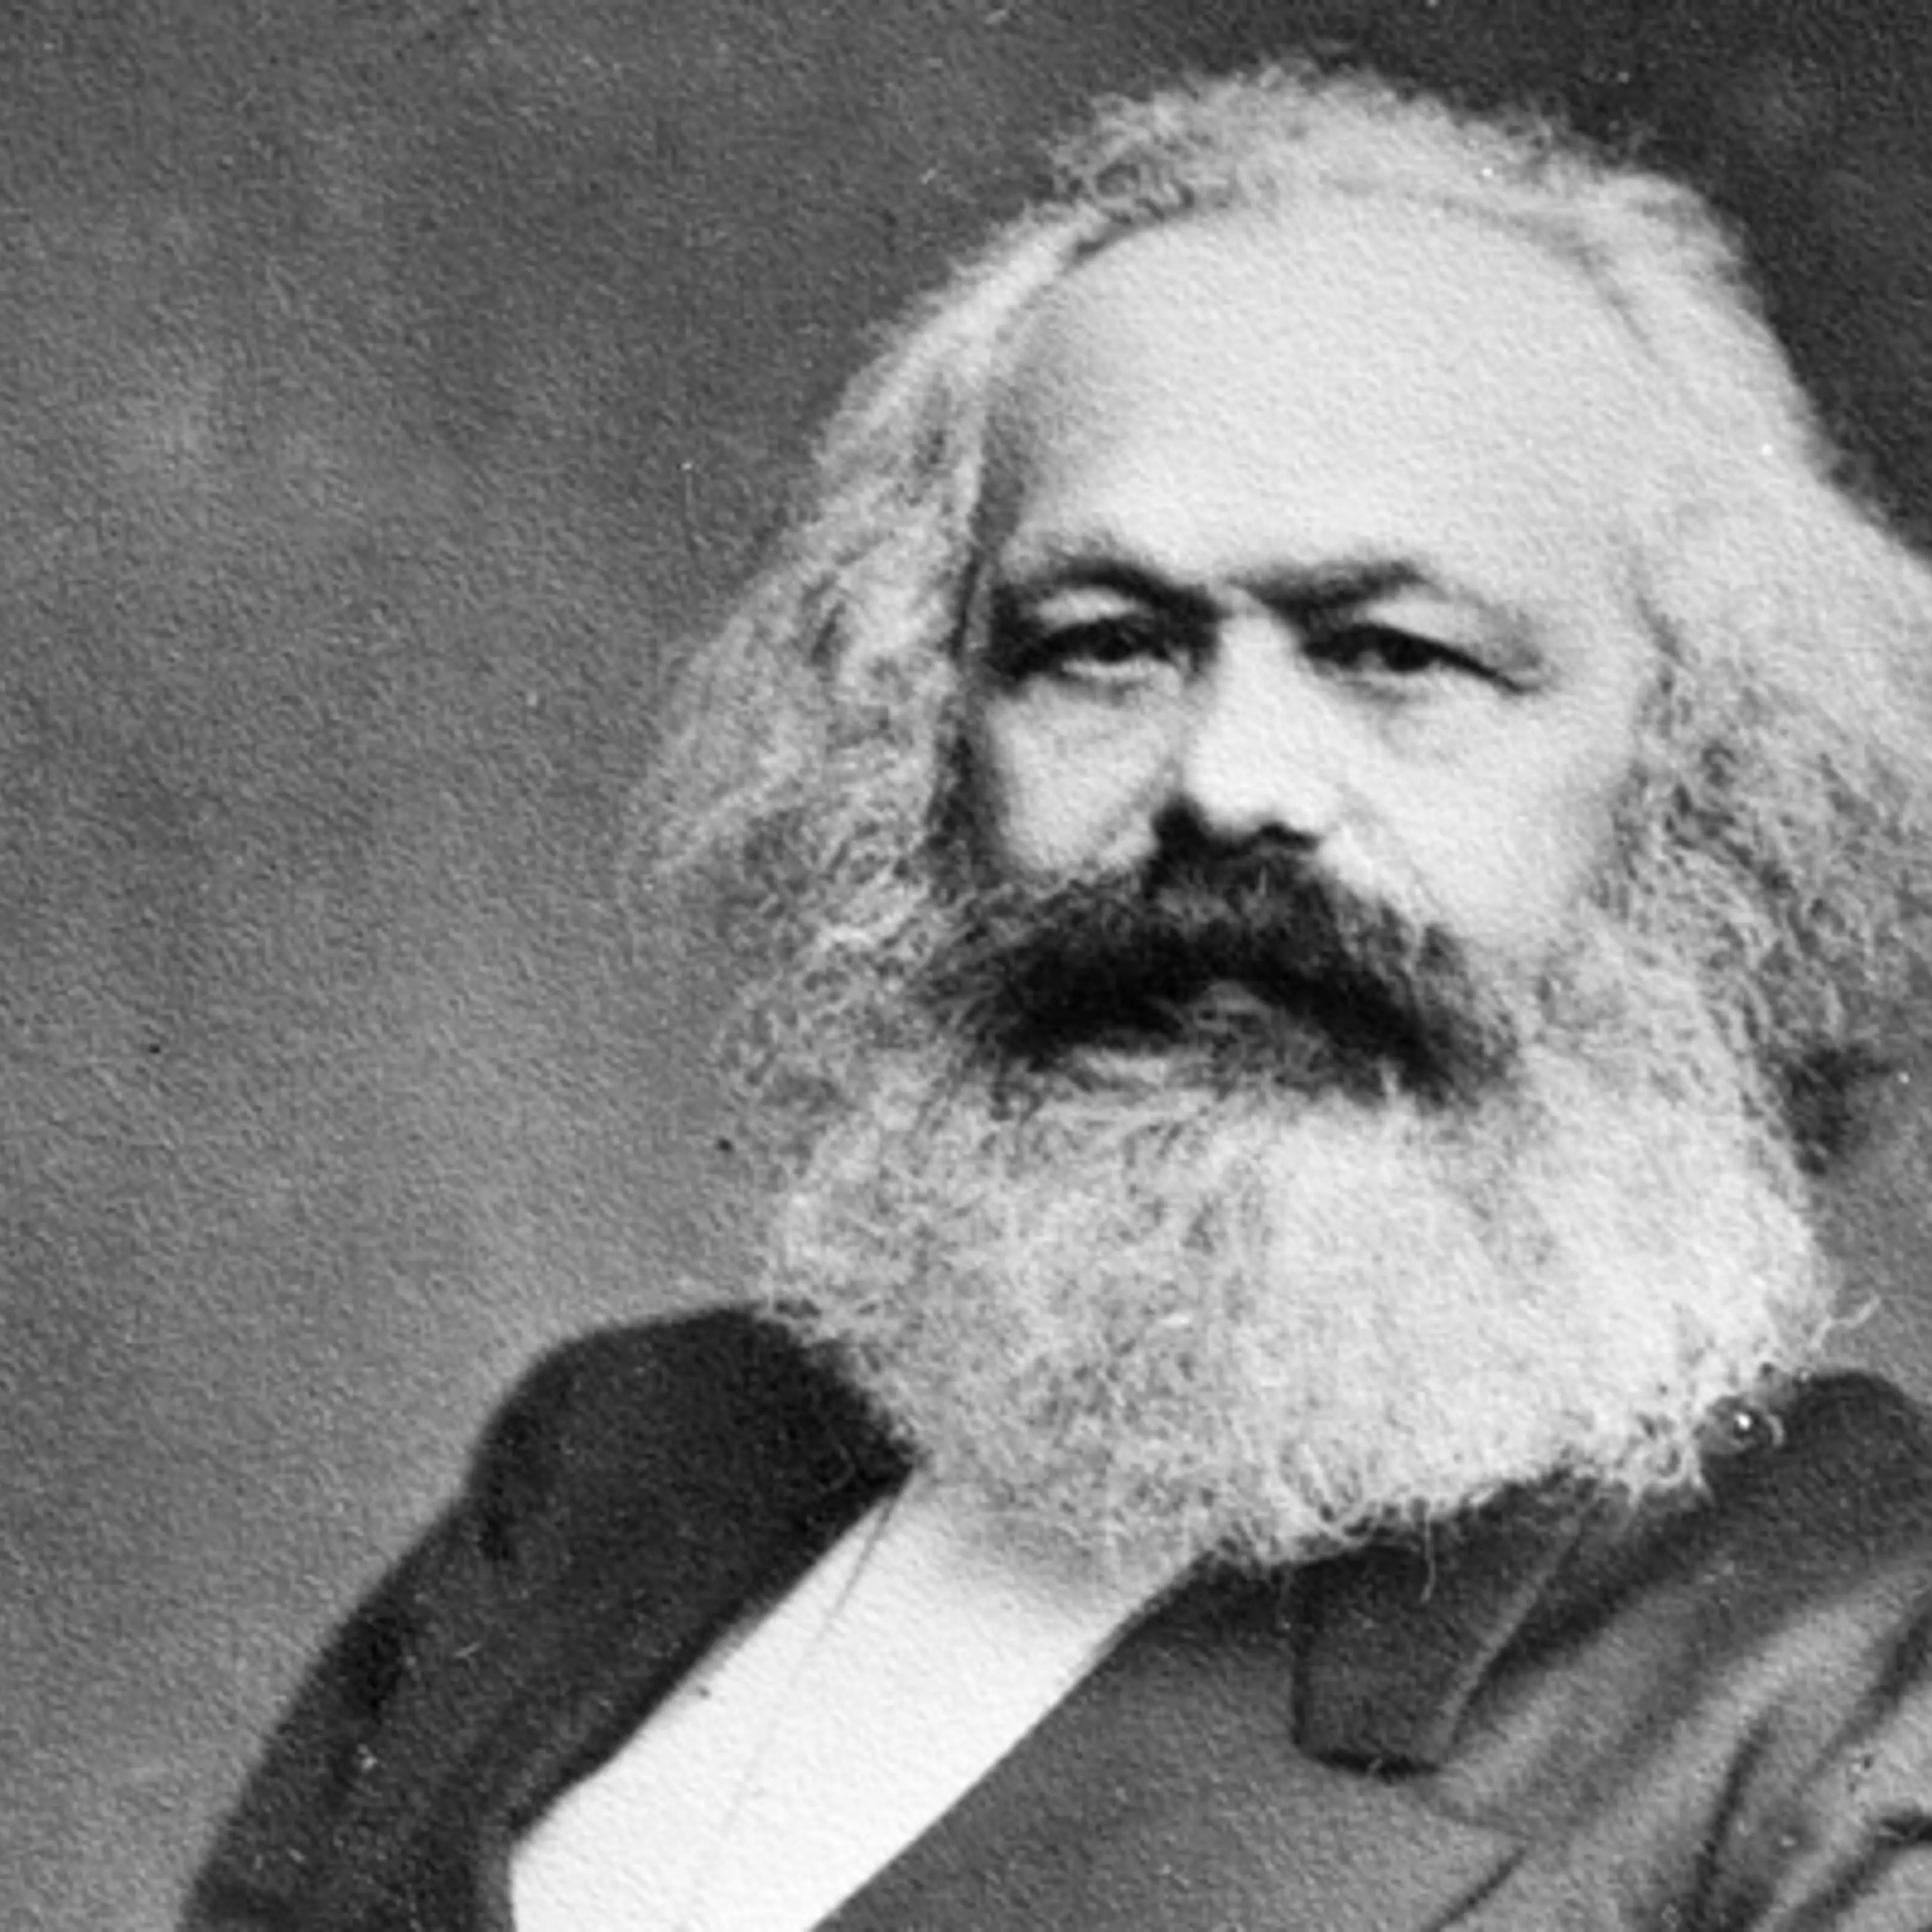 20 quotes from the great German socialist and philosopher, Karl Marx